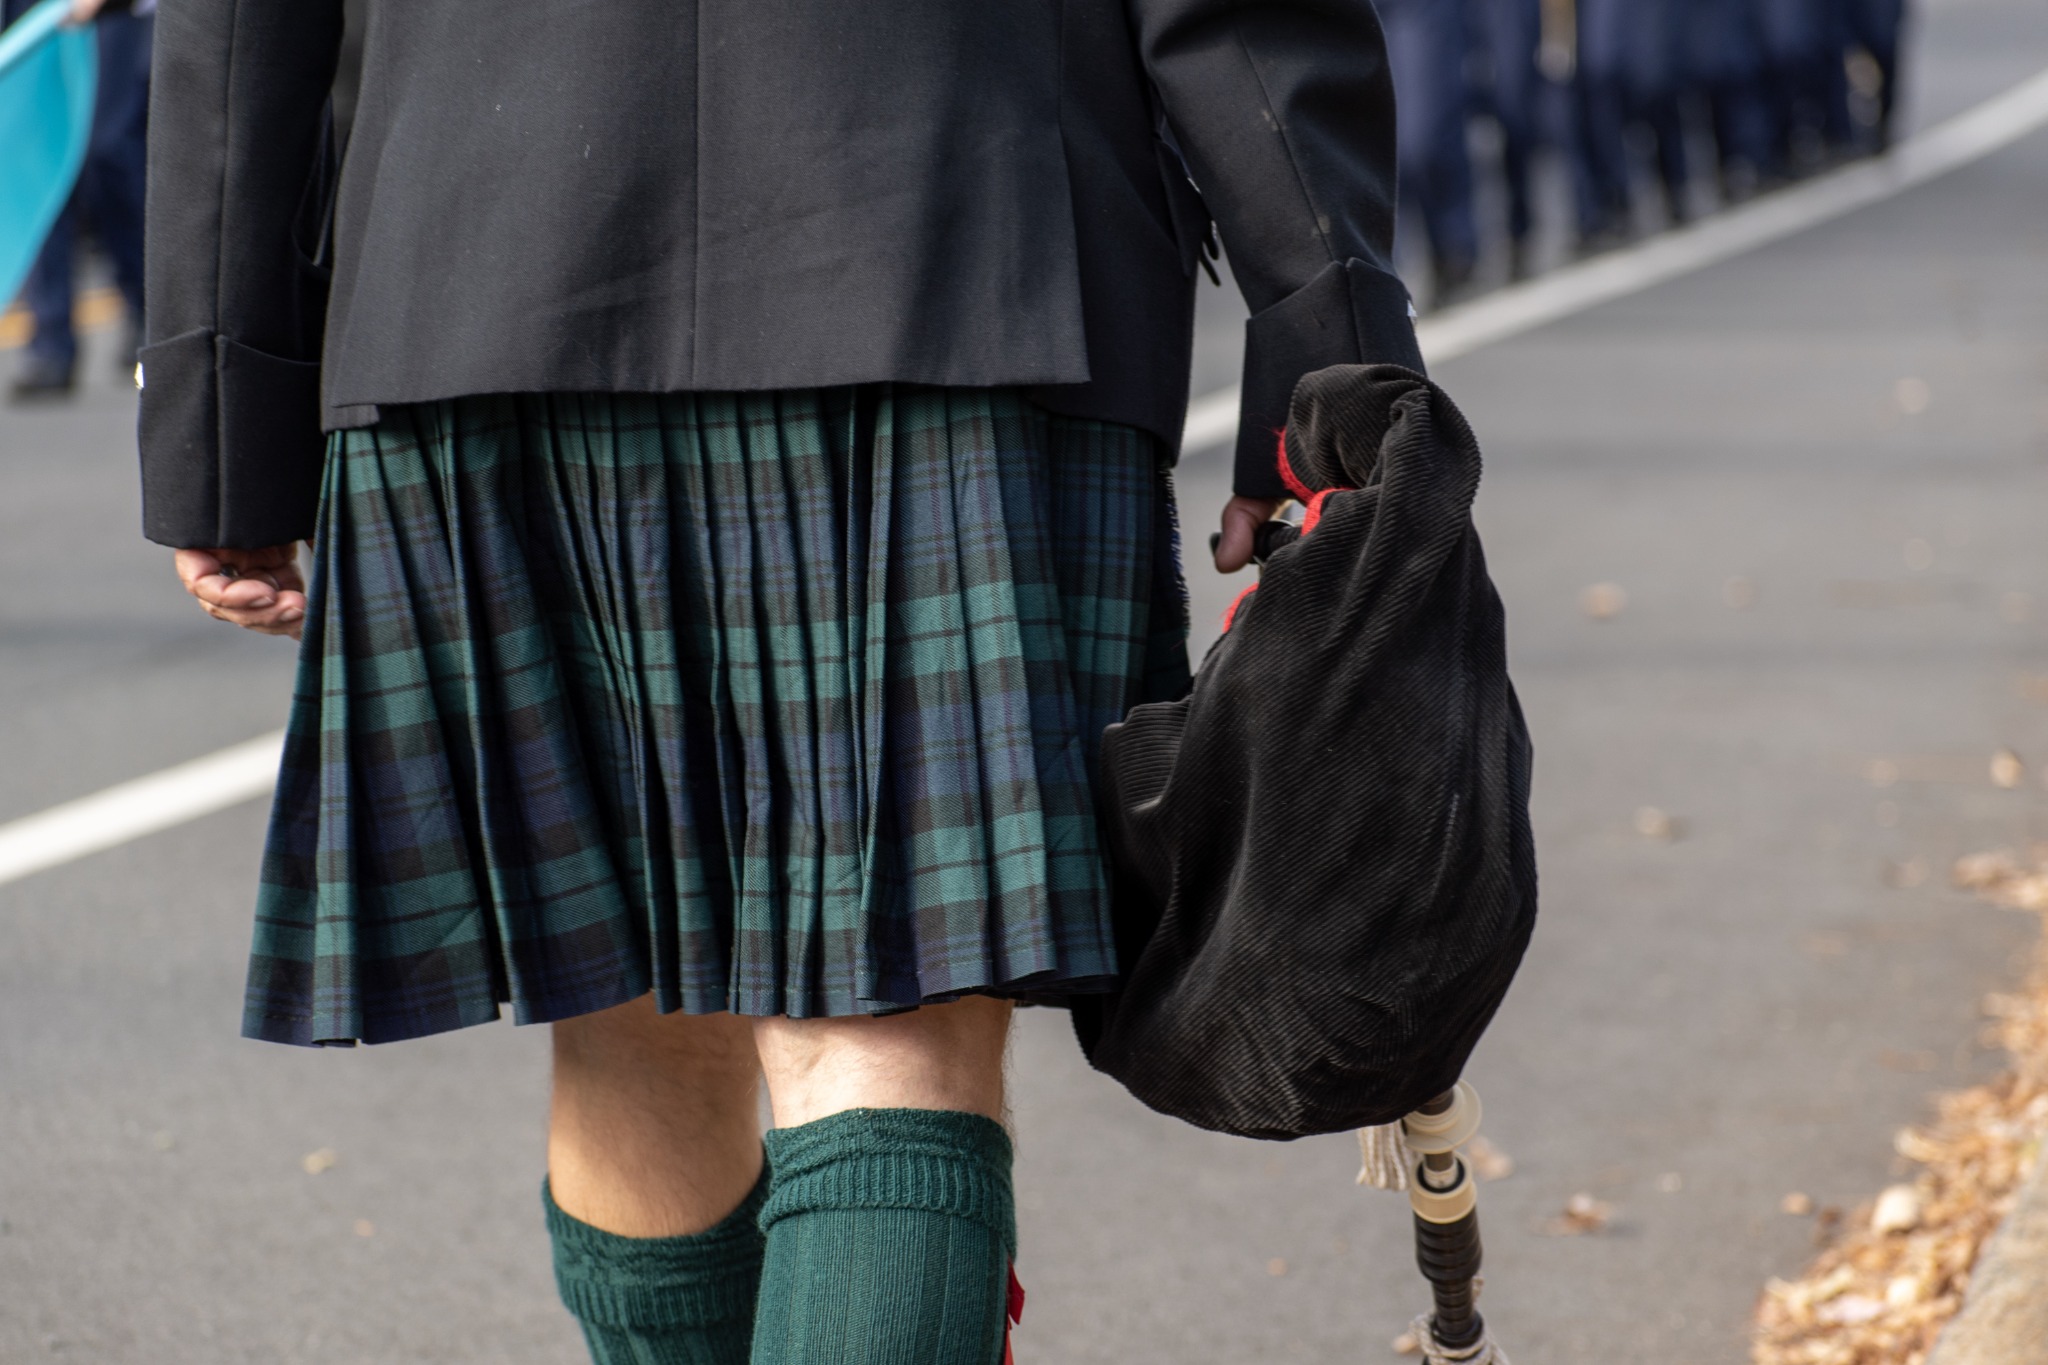 A shot of a man walking away wearing a green and blue tartan kilt and holding a bagpipe.